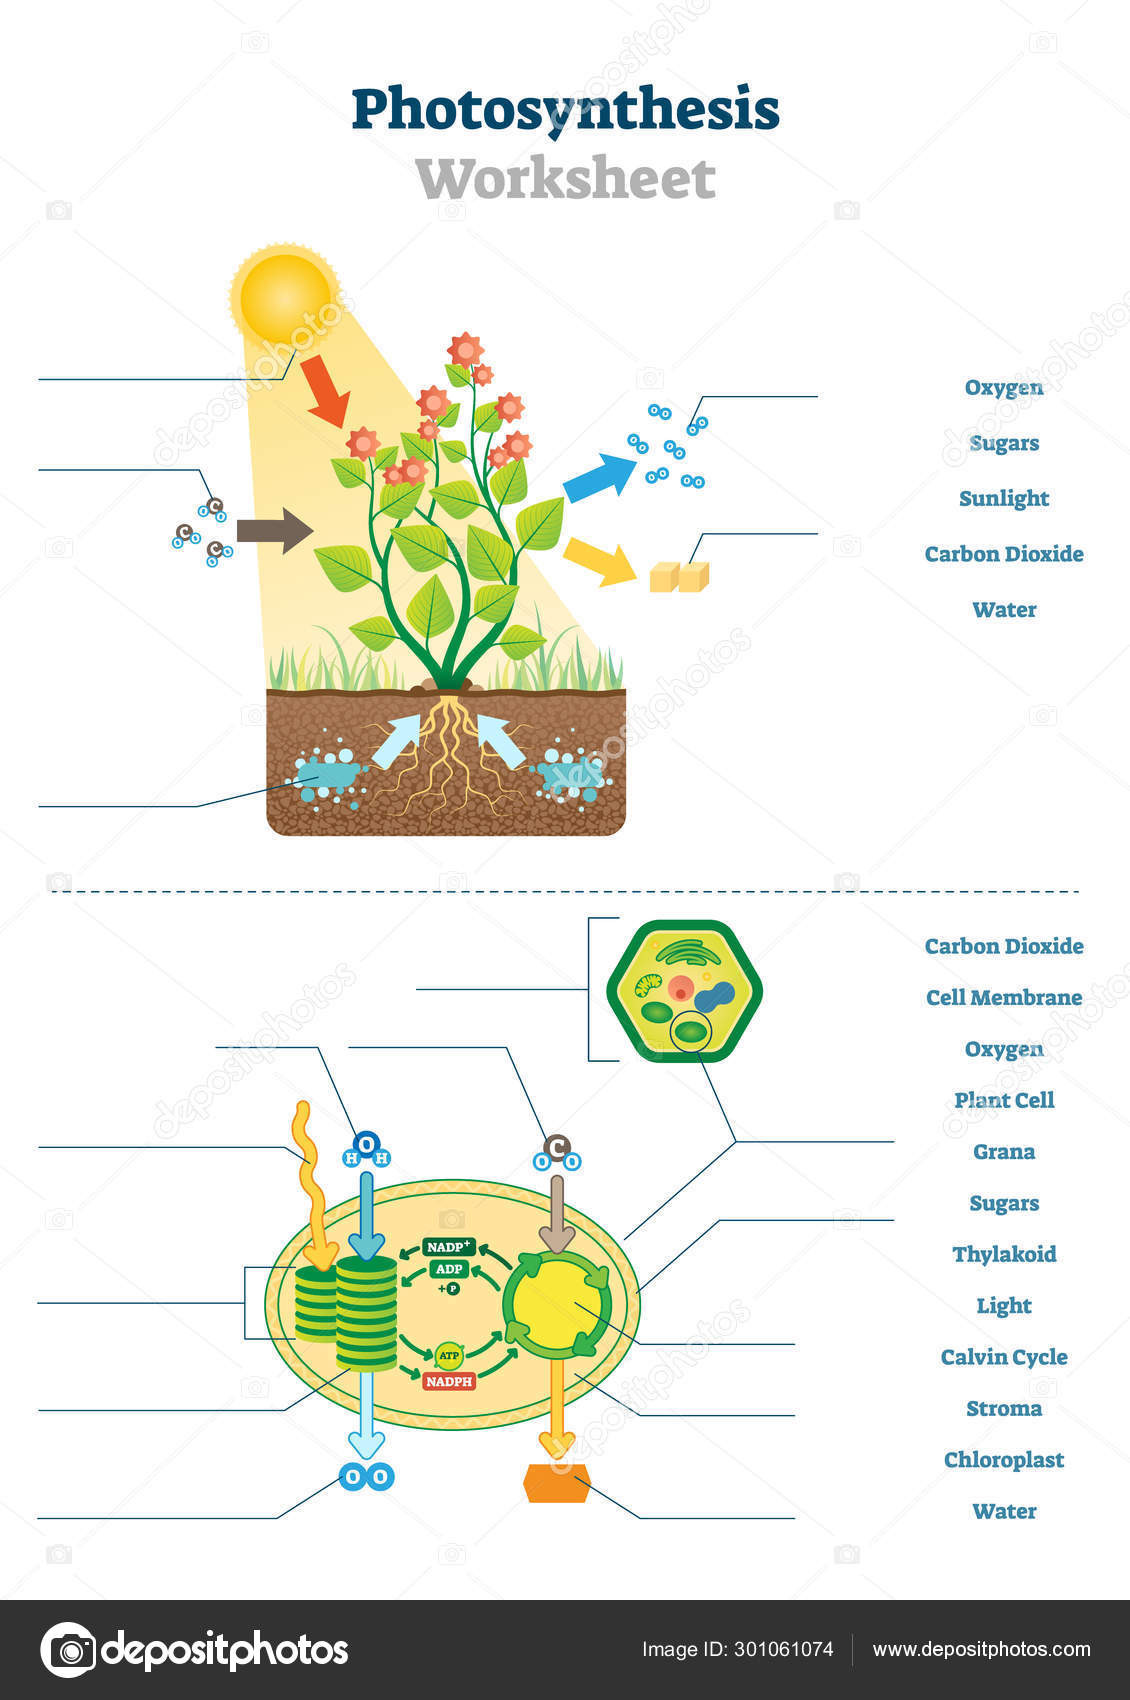 Photosynthesis Diagrams Worksheet Answers Synthesis and Chloroplast Diagram Worksheet Answers